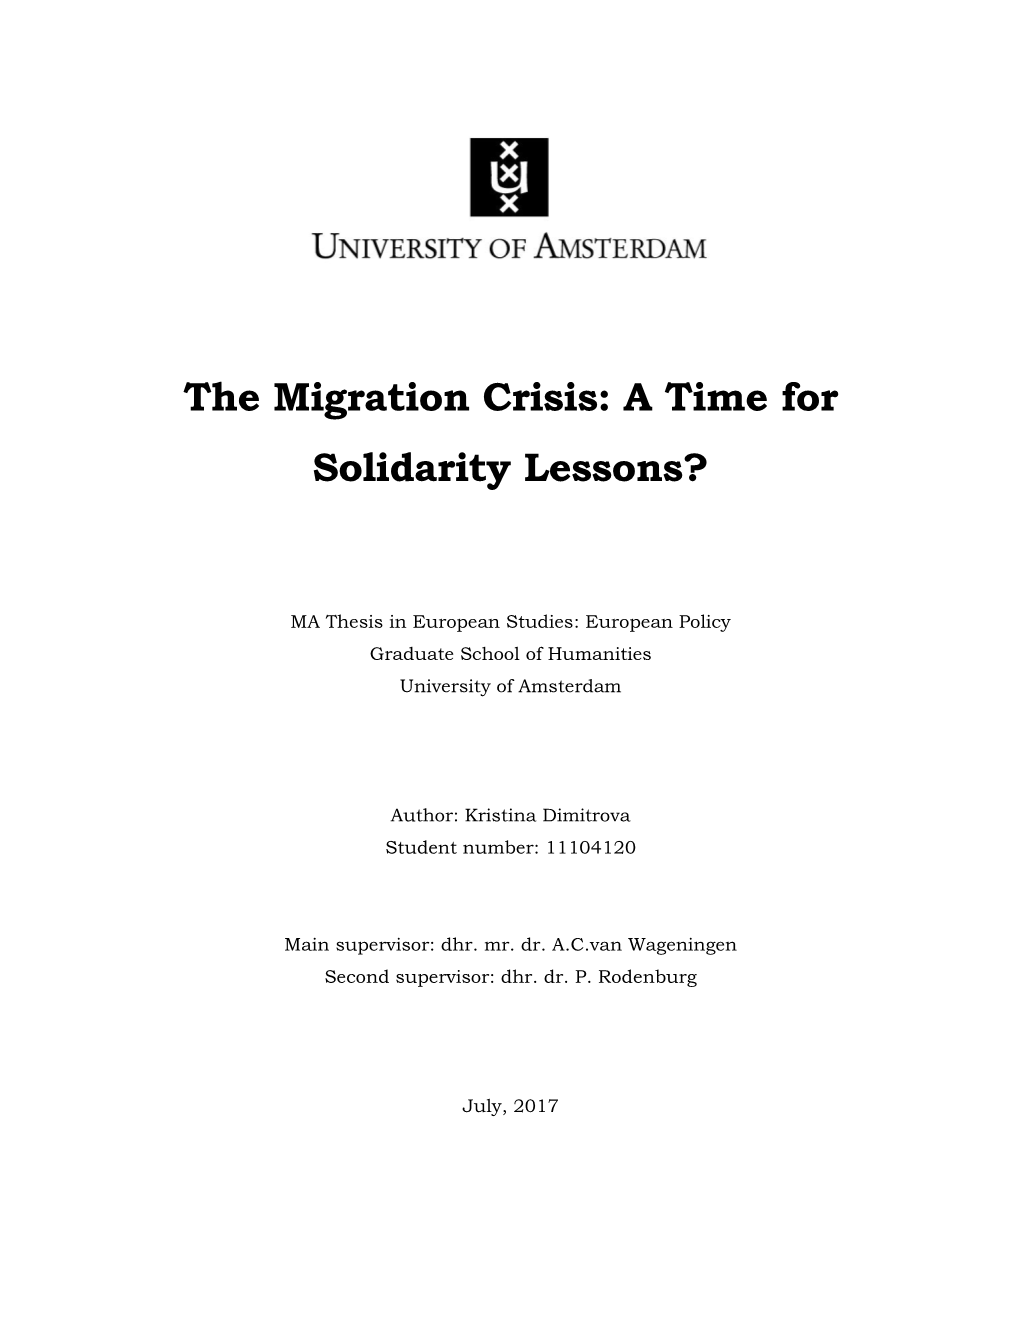 The Migration Crisis: a Time for Solidarity Lessons?